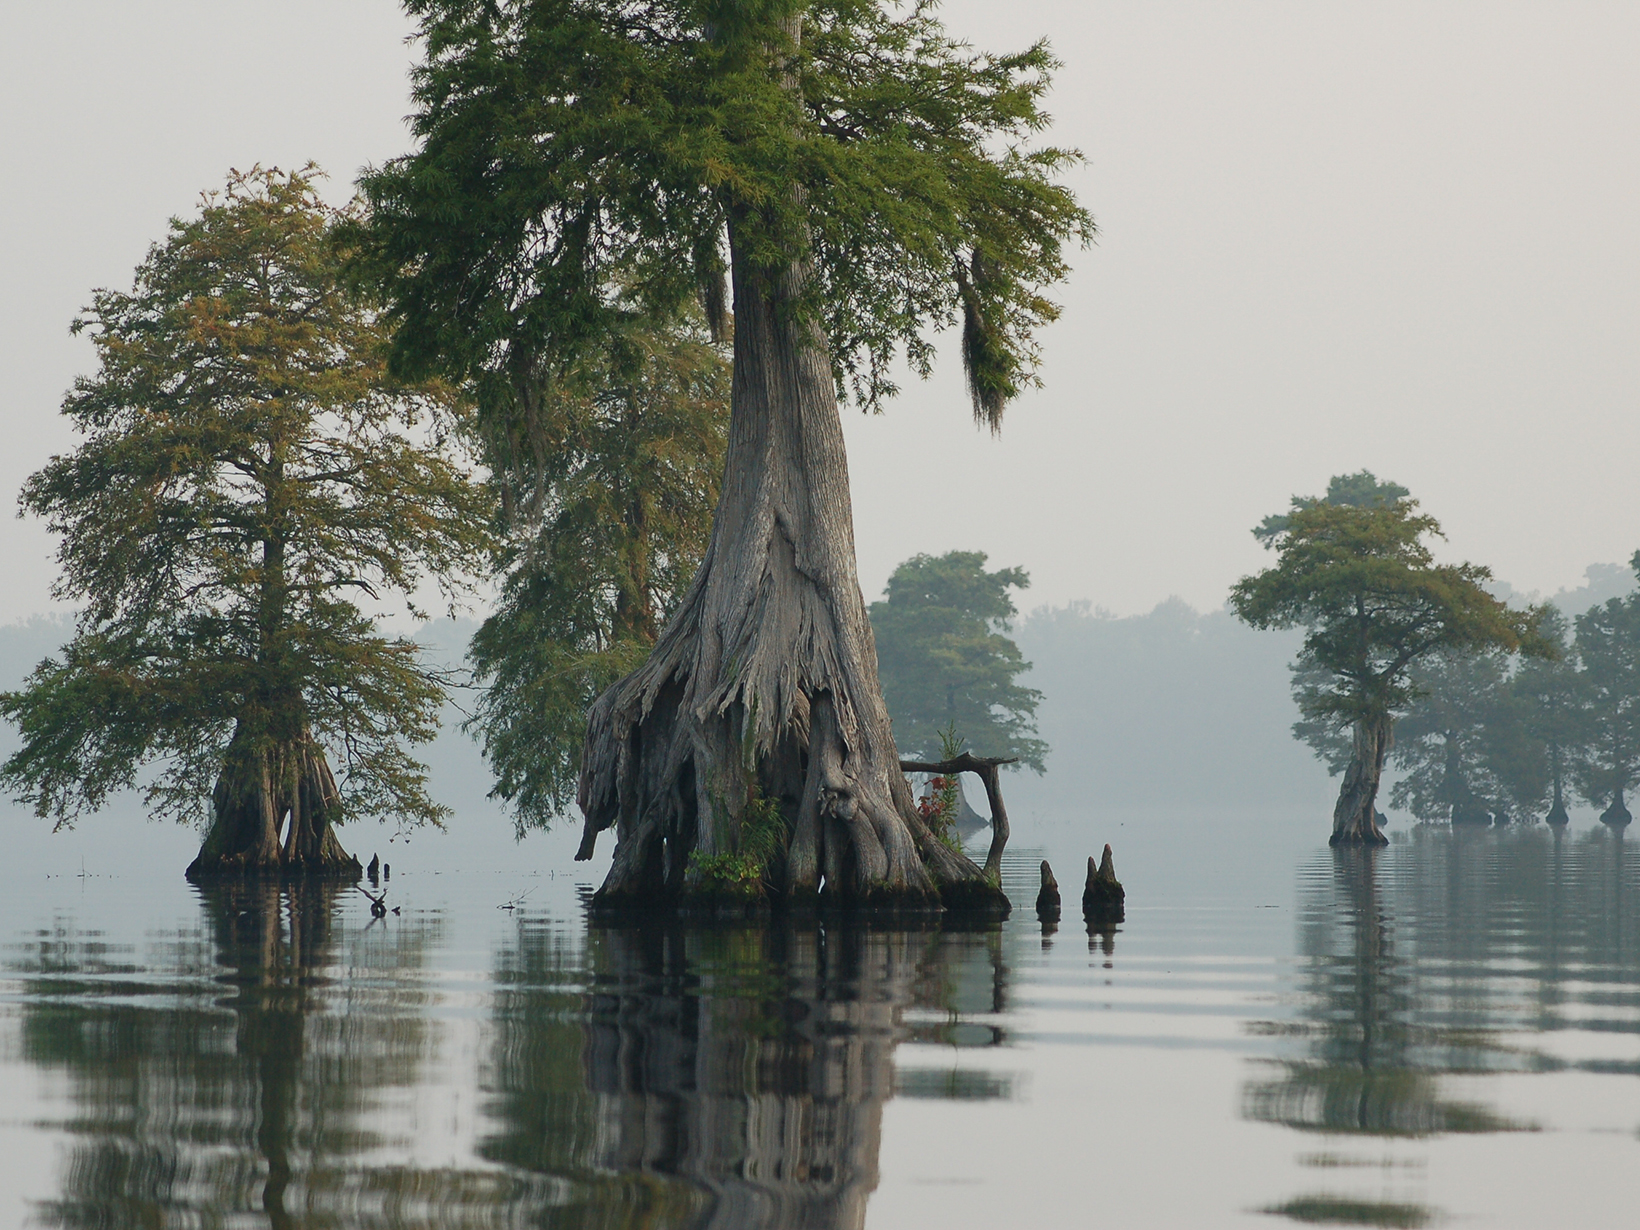 Five tall knobby kneed cypress trees rise out of the still water of Lake Drummond at Great Dismal NWR. The trees are reflected in the surface of the lake. Heavy white mist obscures a stand of trees.